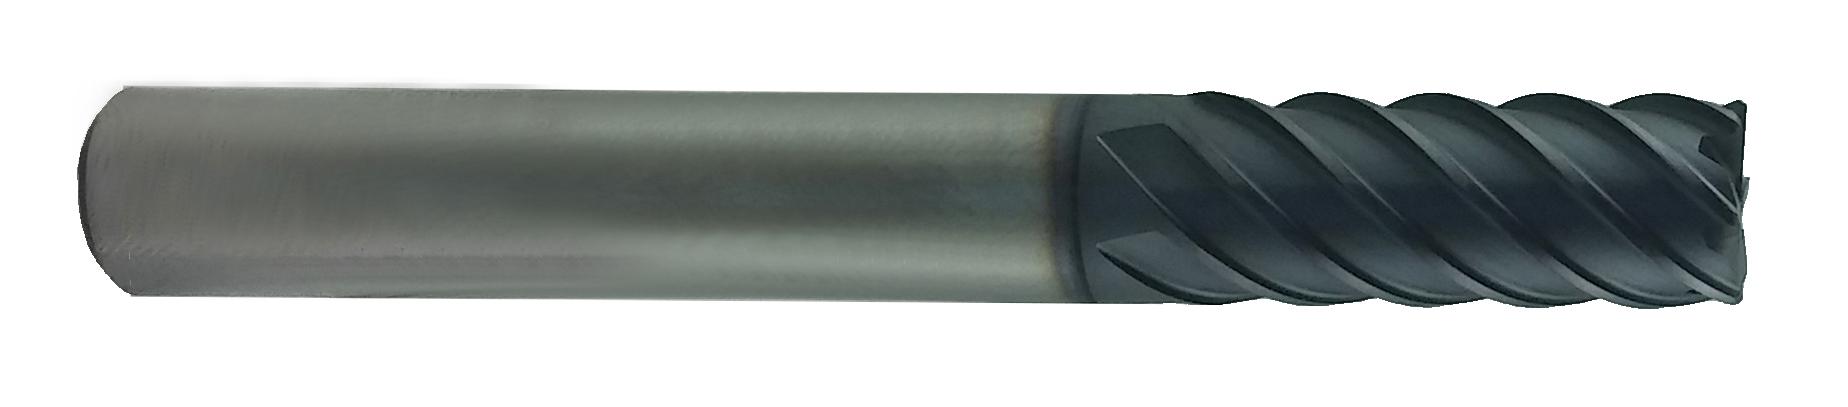 Alfa Tools SCL60666AL 5/8X5/8 4 Flute Single End Center Cutting Long AlTiN Carbide End Mill Made In USA, 